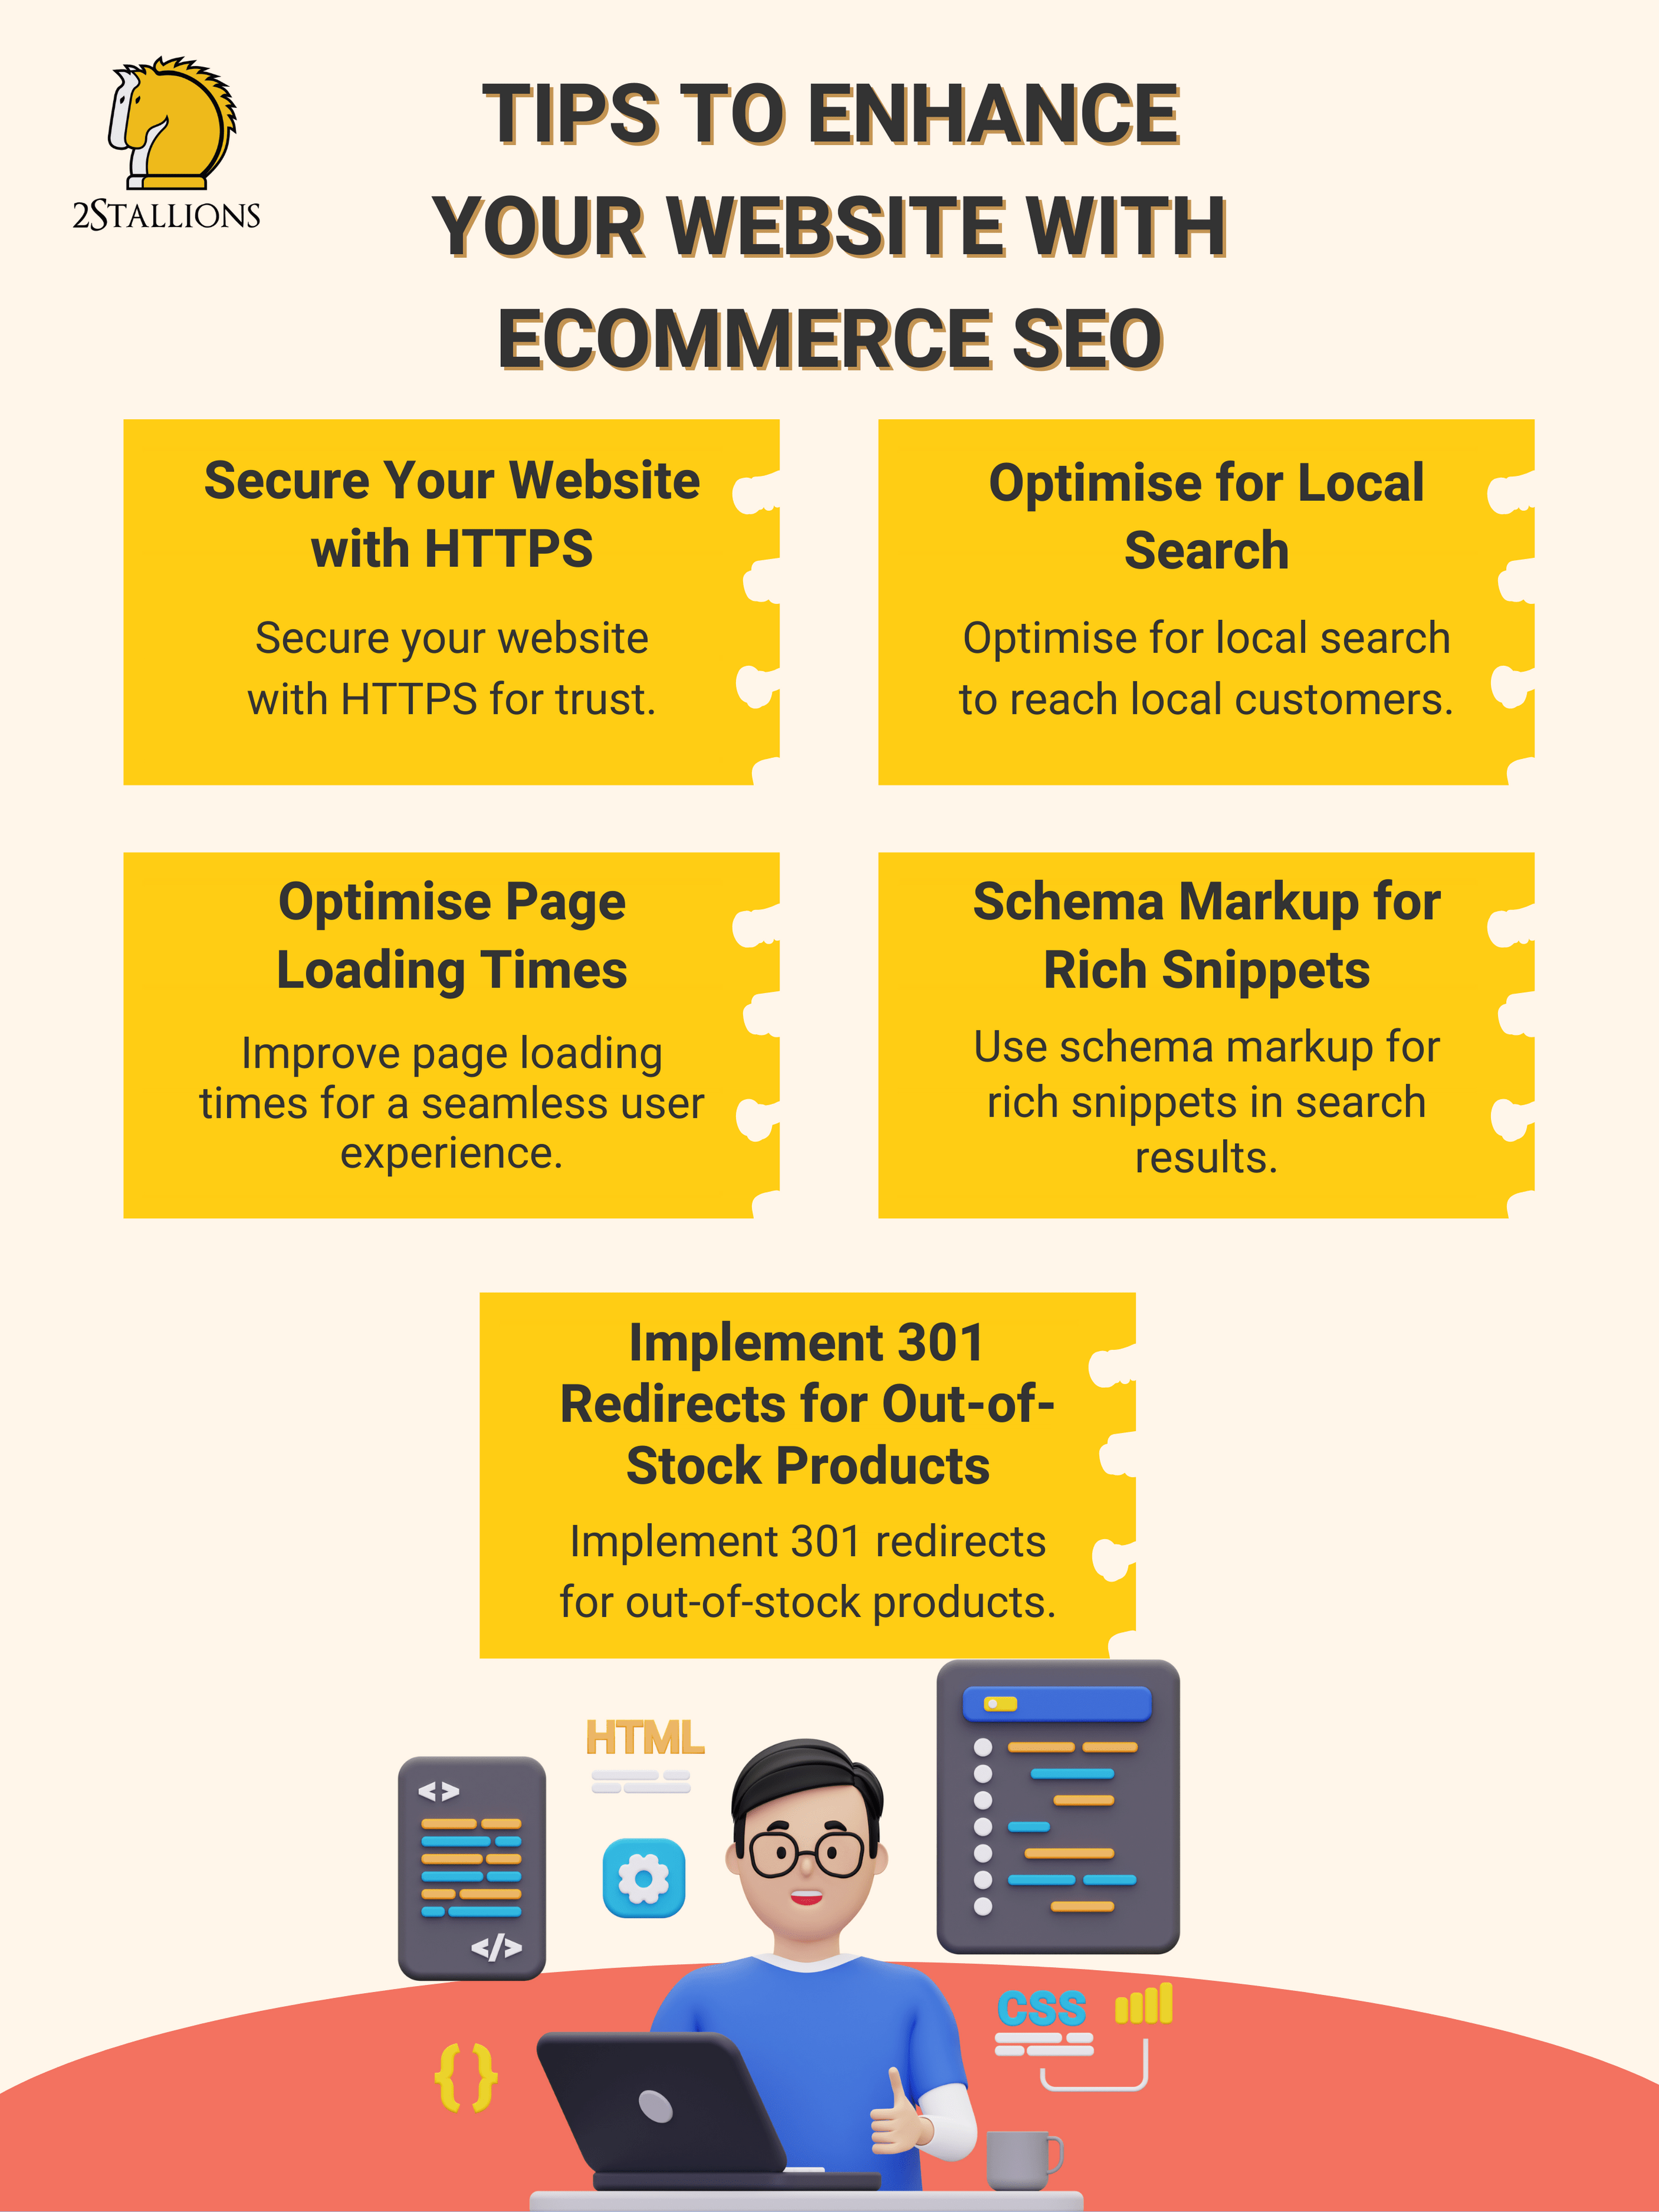 Tips To Enhance Your Website With Ecommerce Seo | 2Stallions